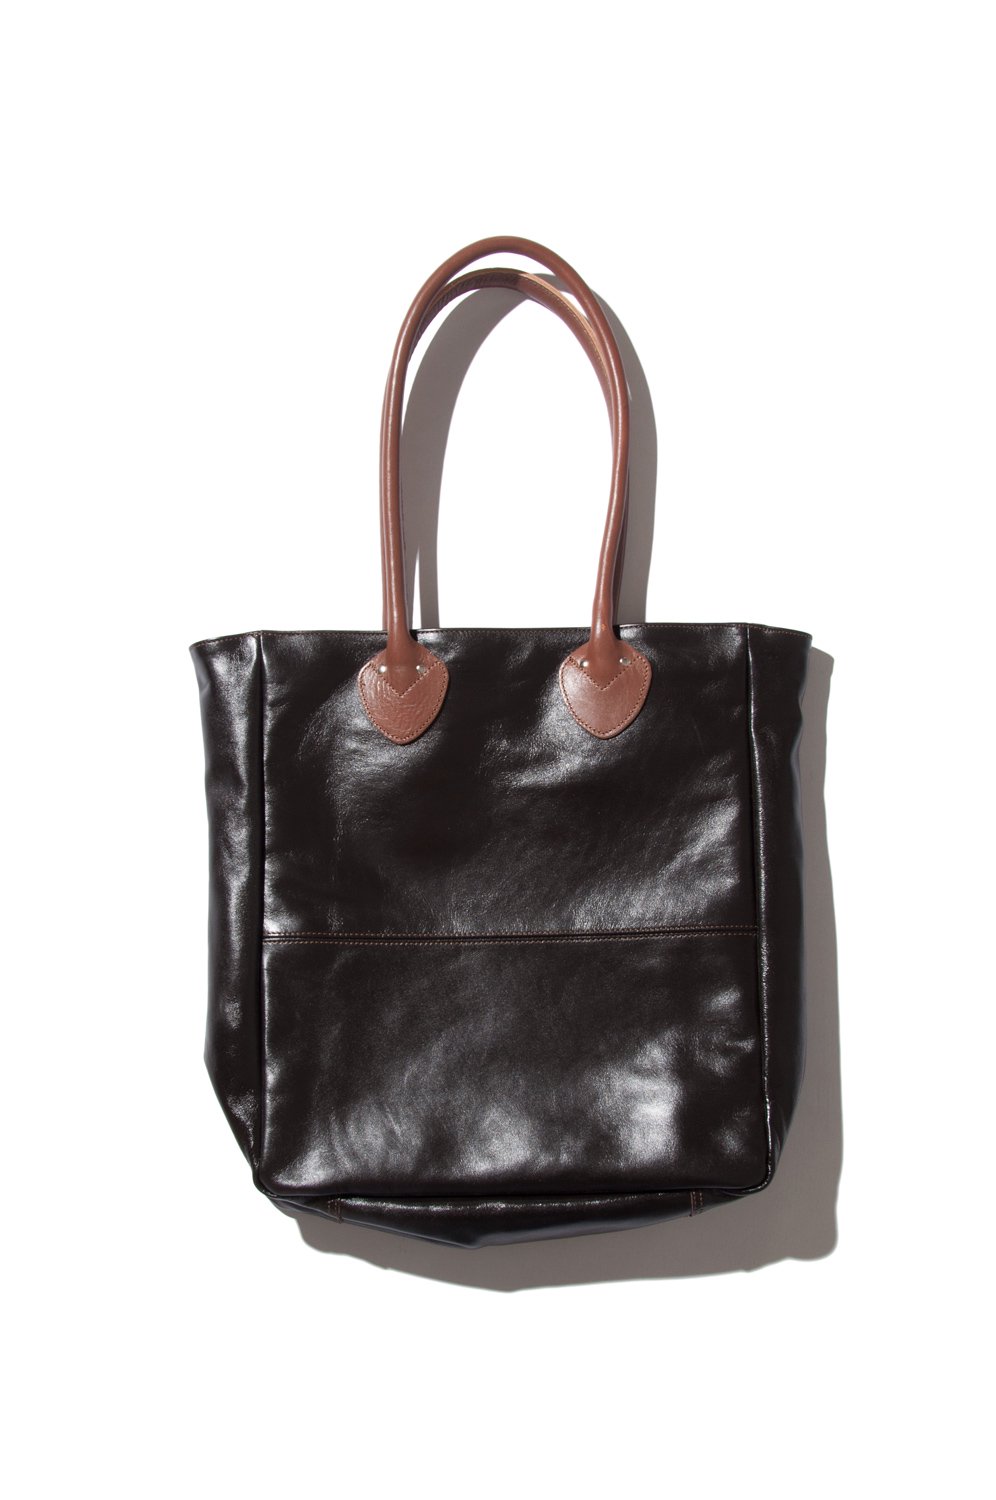 TOYS McCOY(トイズマッコイ) レザートートバッグ LEATHER TOTE BAG 